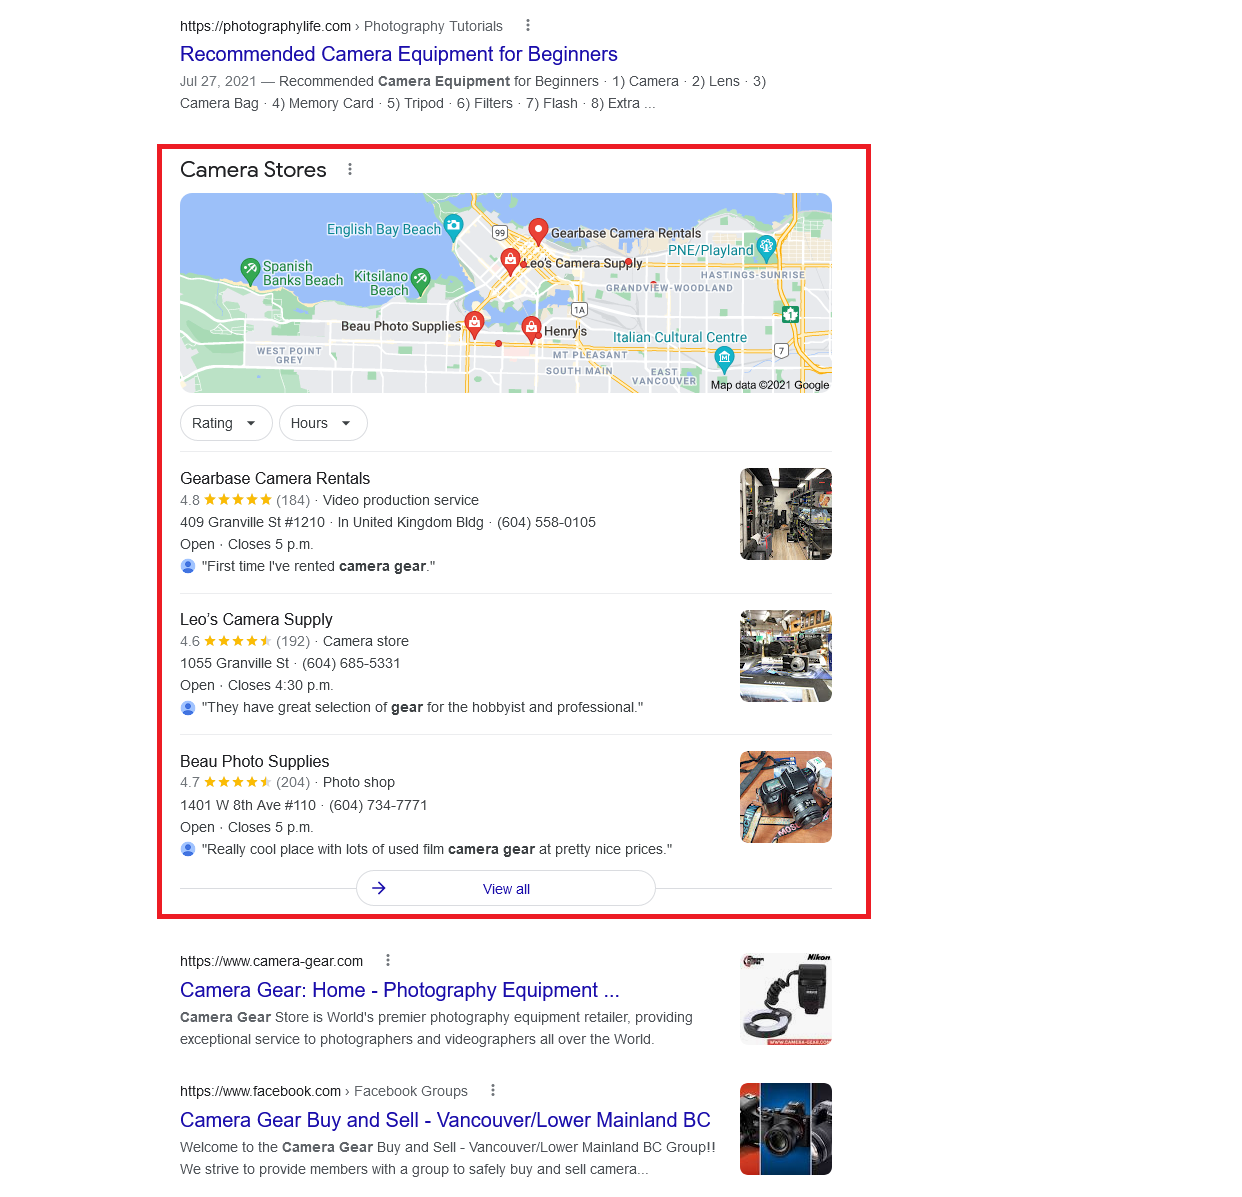 Local SEO is the area on SERP where you will find the map, business information, and customer reviews